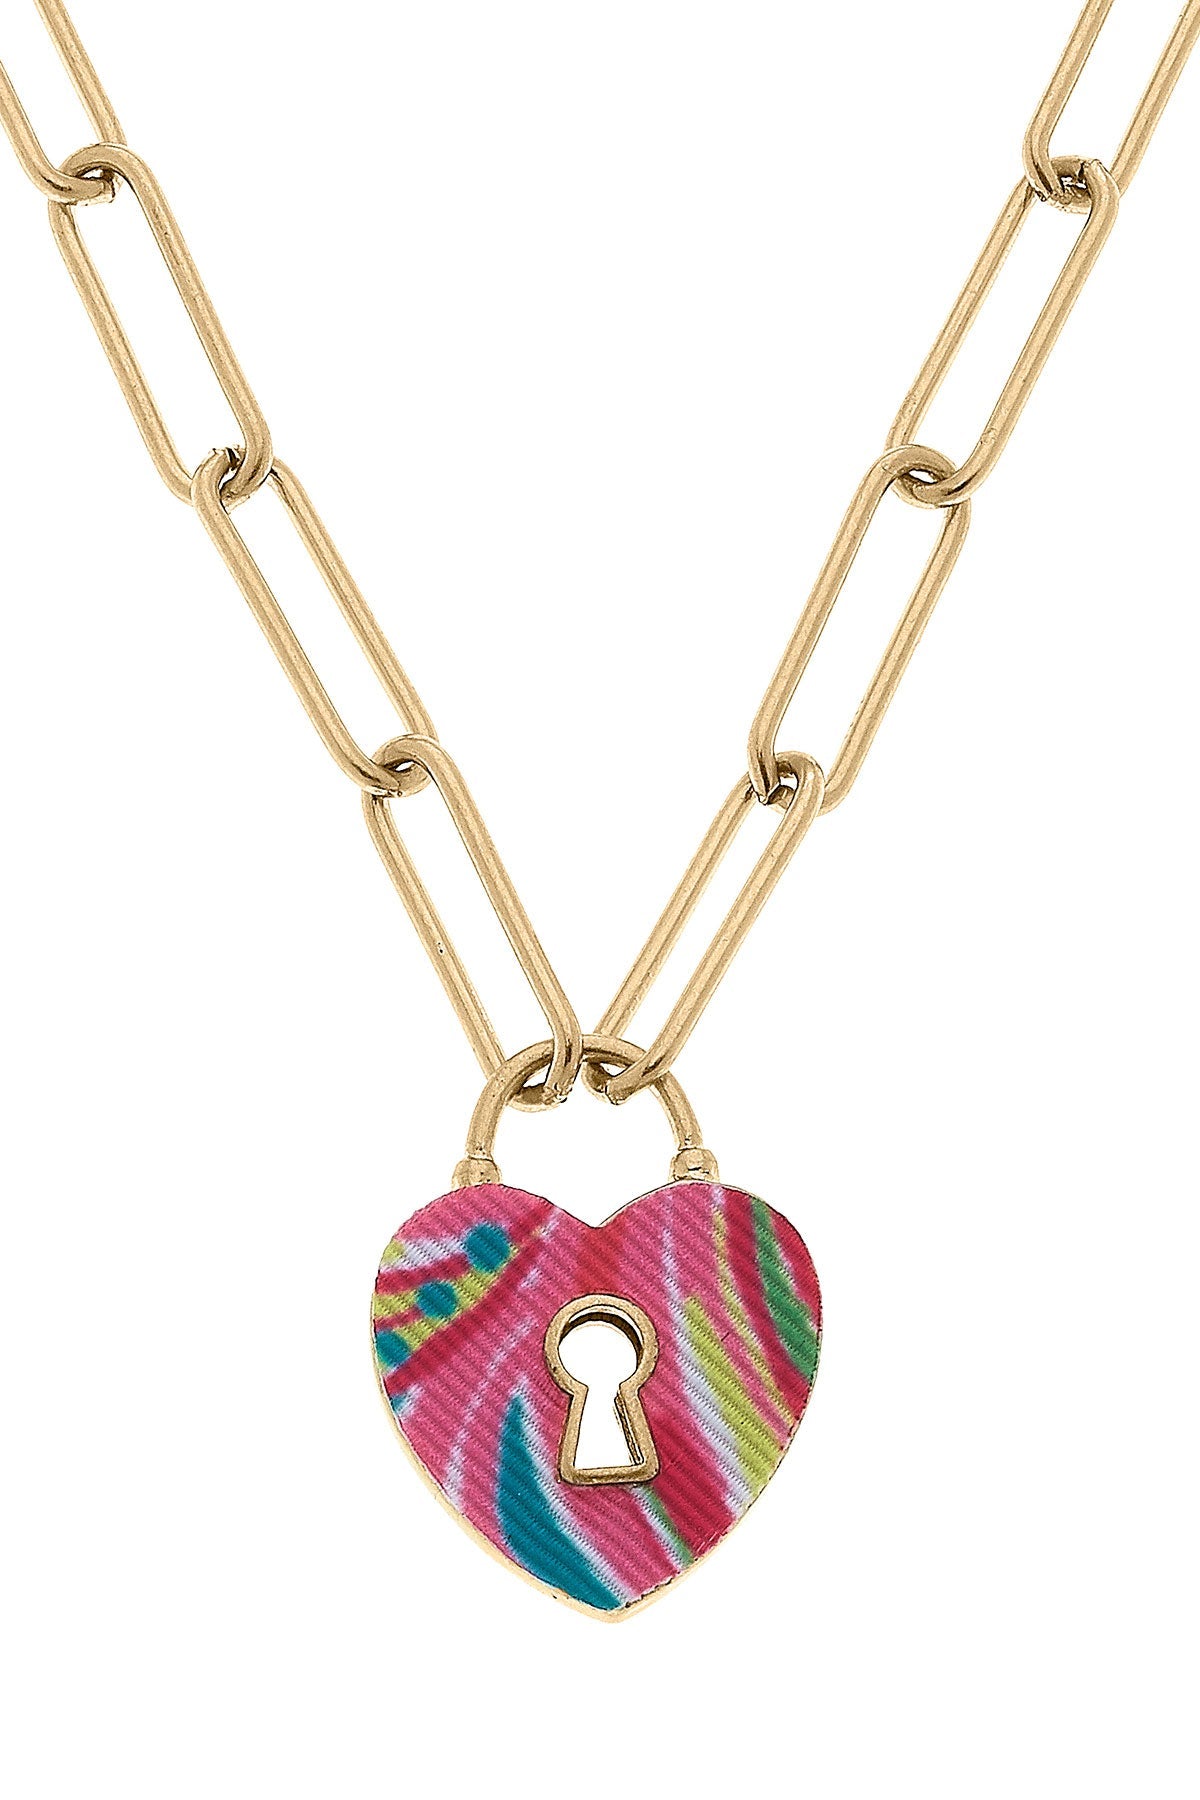 Monclér Tropical Heart Padlock Necklace in Pink by CANVAS